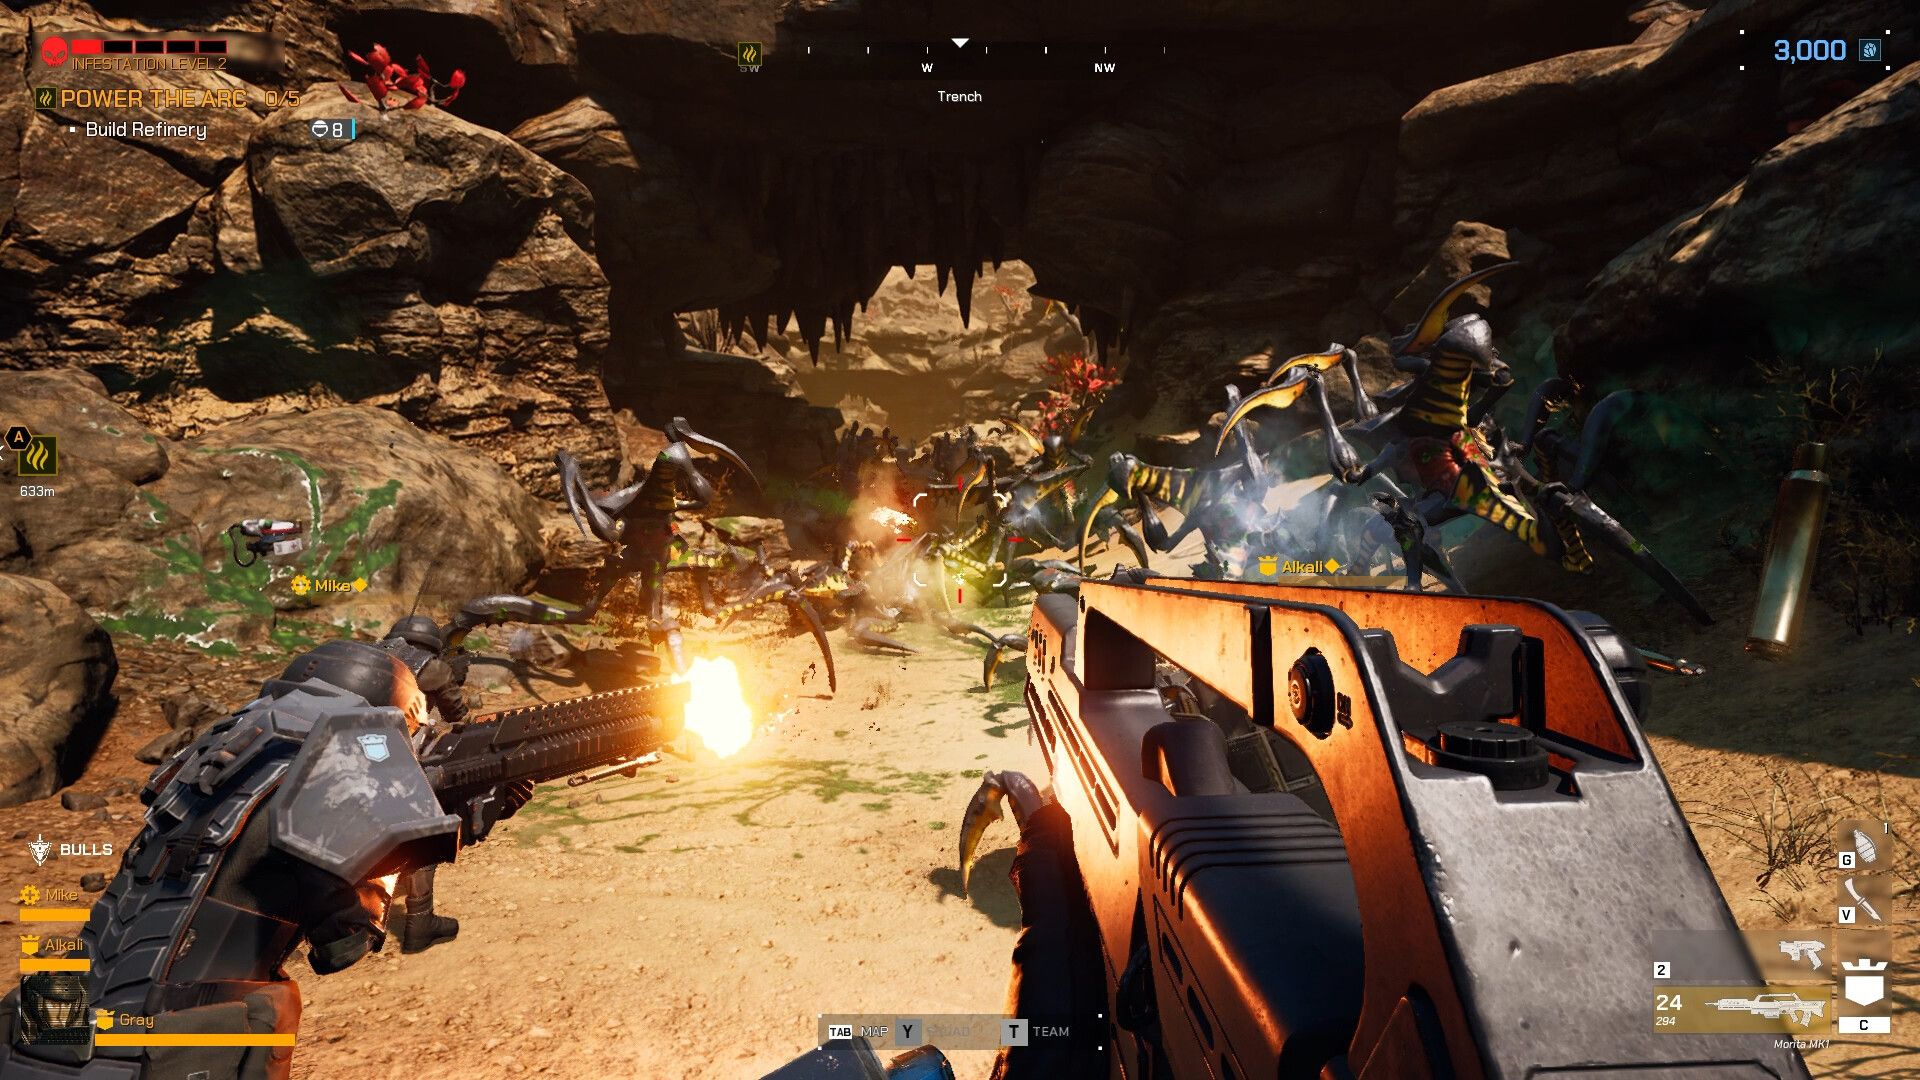 Starship Troopers: Extermination Shows Off Co-op Gameplay in New Trailer